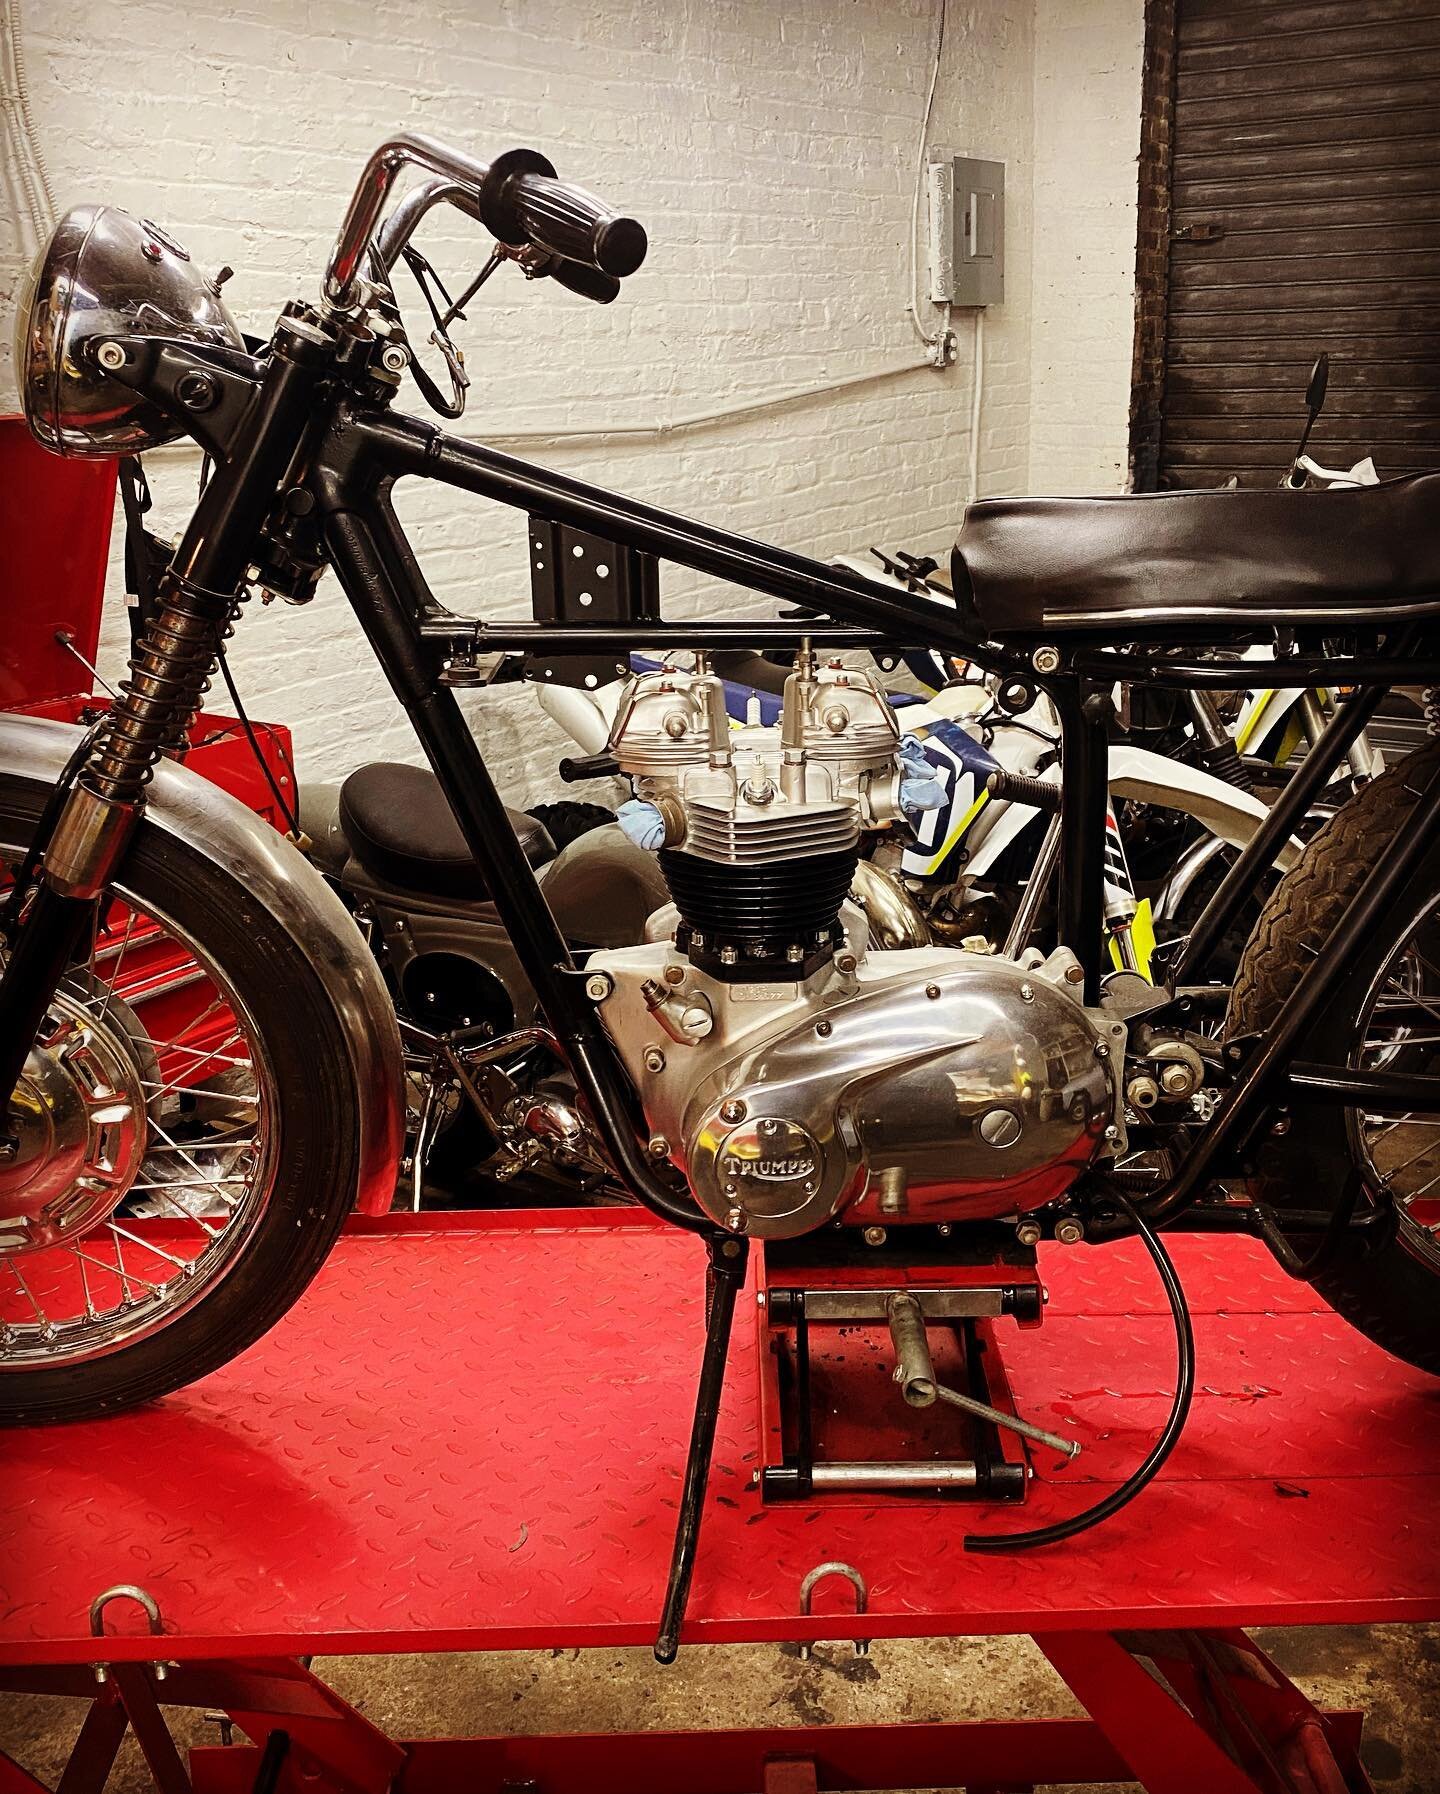 Assembly time for this 
1968 Bonneville! Wait till you see the painted parts

retroclassicfeel #retro #classic #feel #retrostyle #classics #classicmotorcycle #classicstyle #styleicon #style #inspire #vintage #vintageinspired #italian #streetlife #str